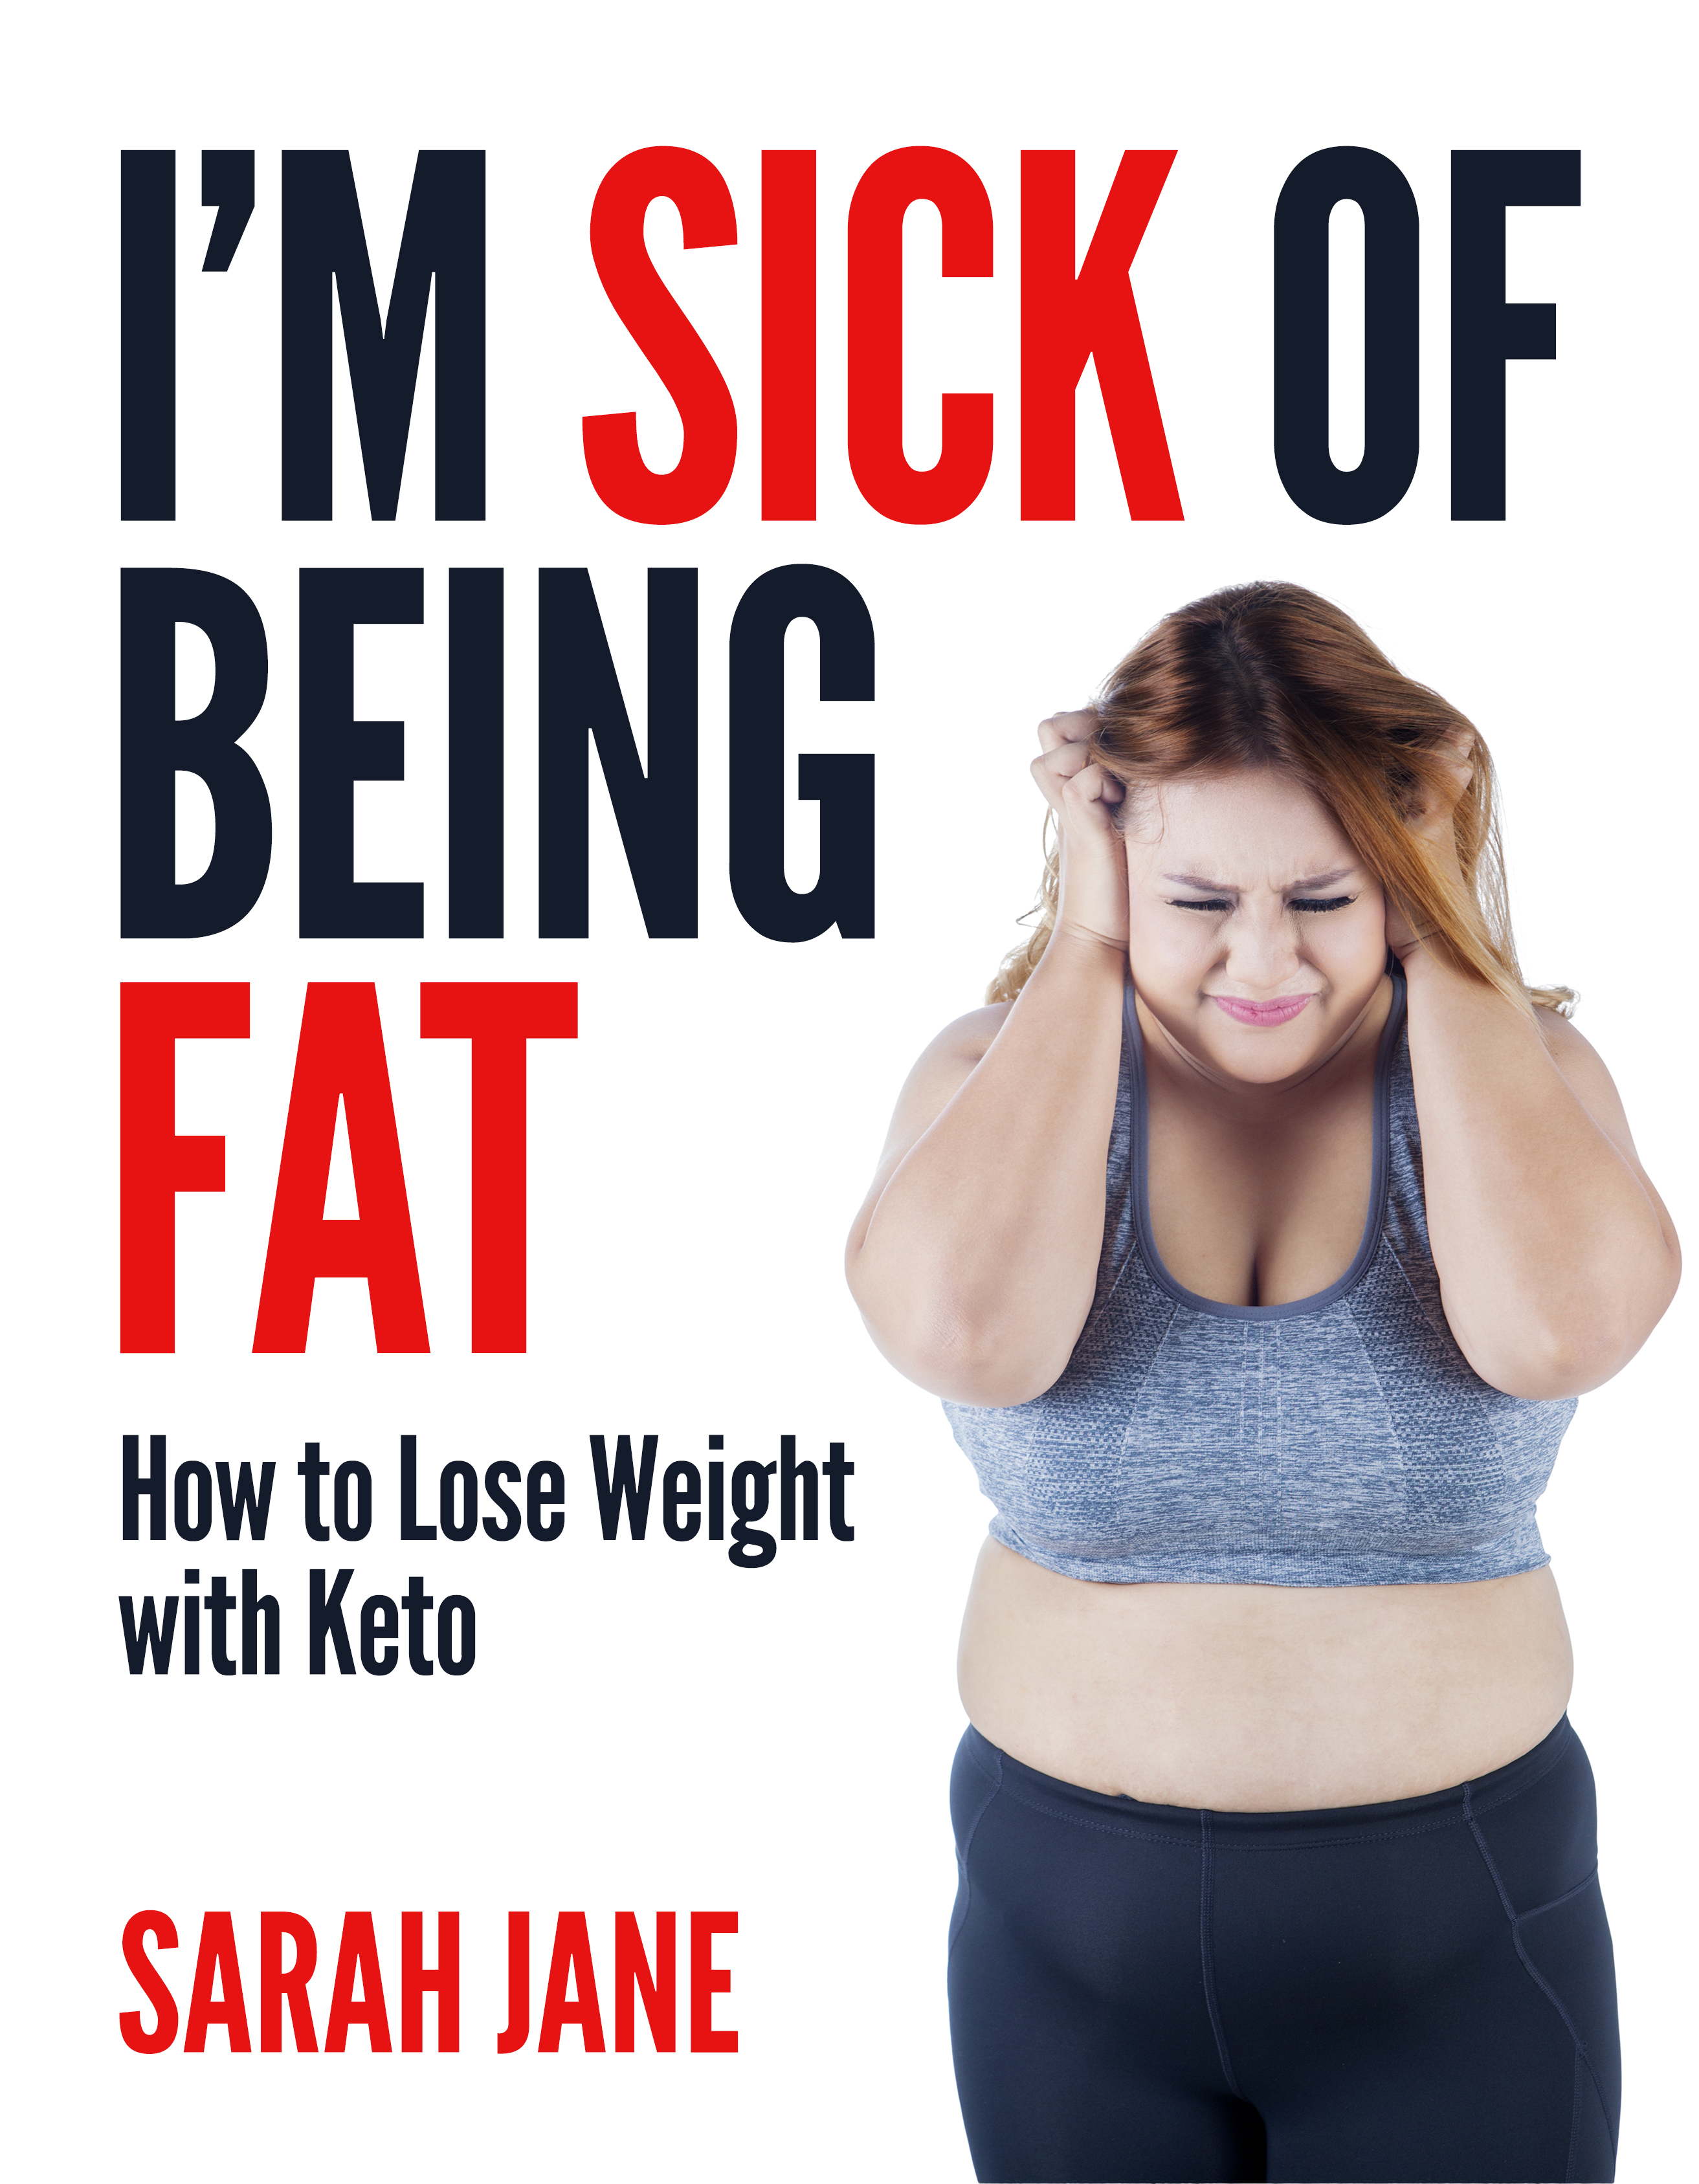 FREE: I’m Sick of Being Fat! by Sarah Jane